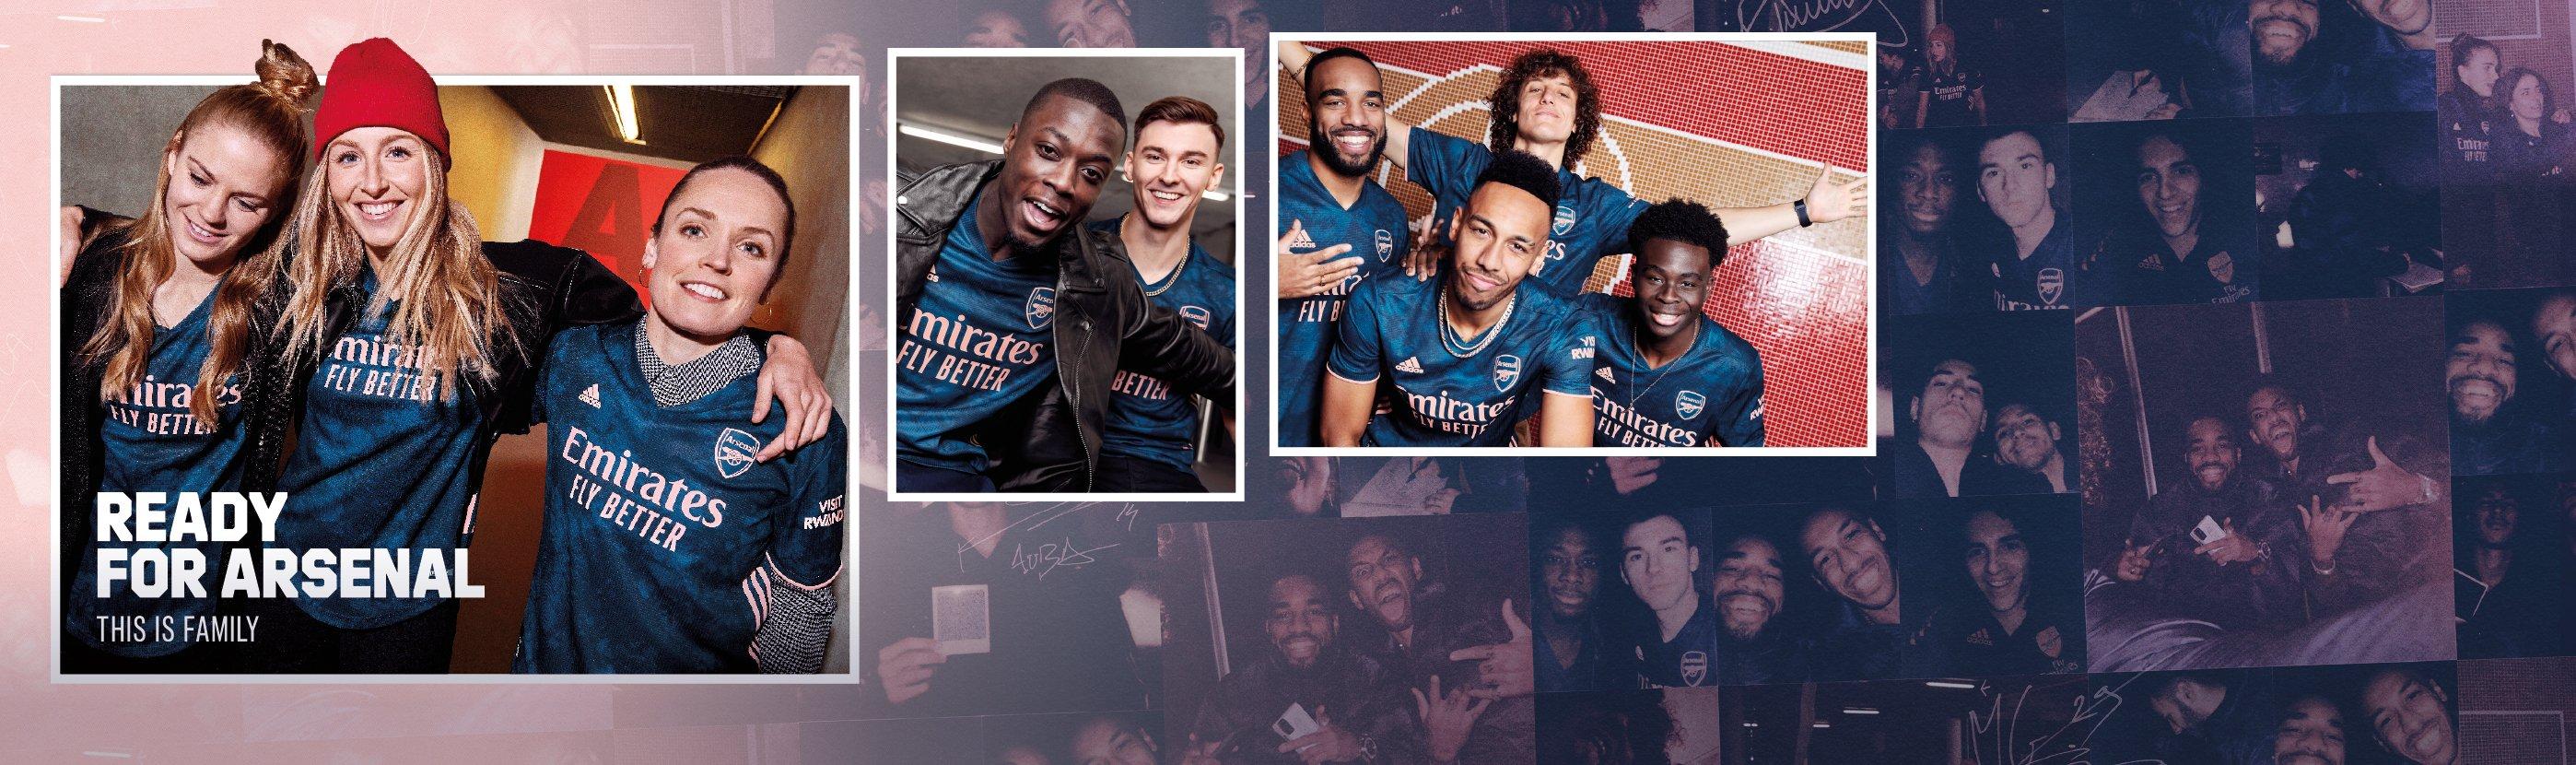 The Arsenal 20 21 Third Kit Official Online Store Official Online Store